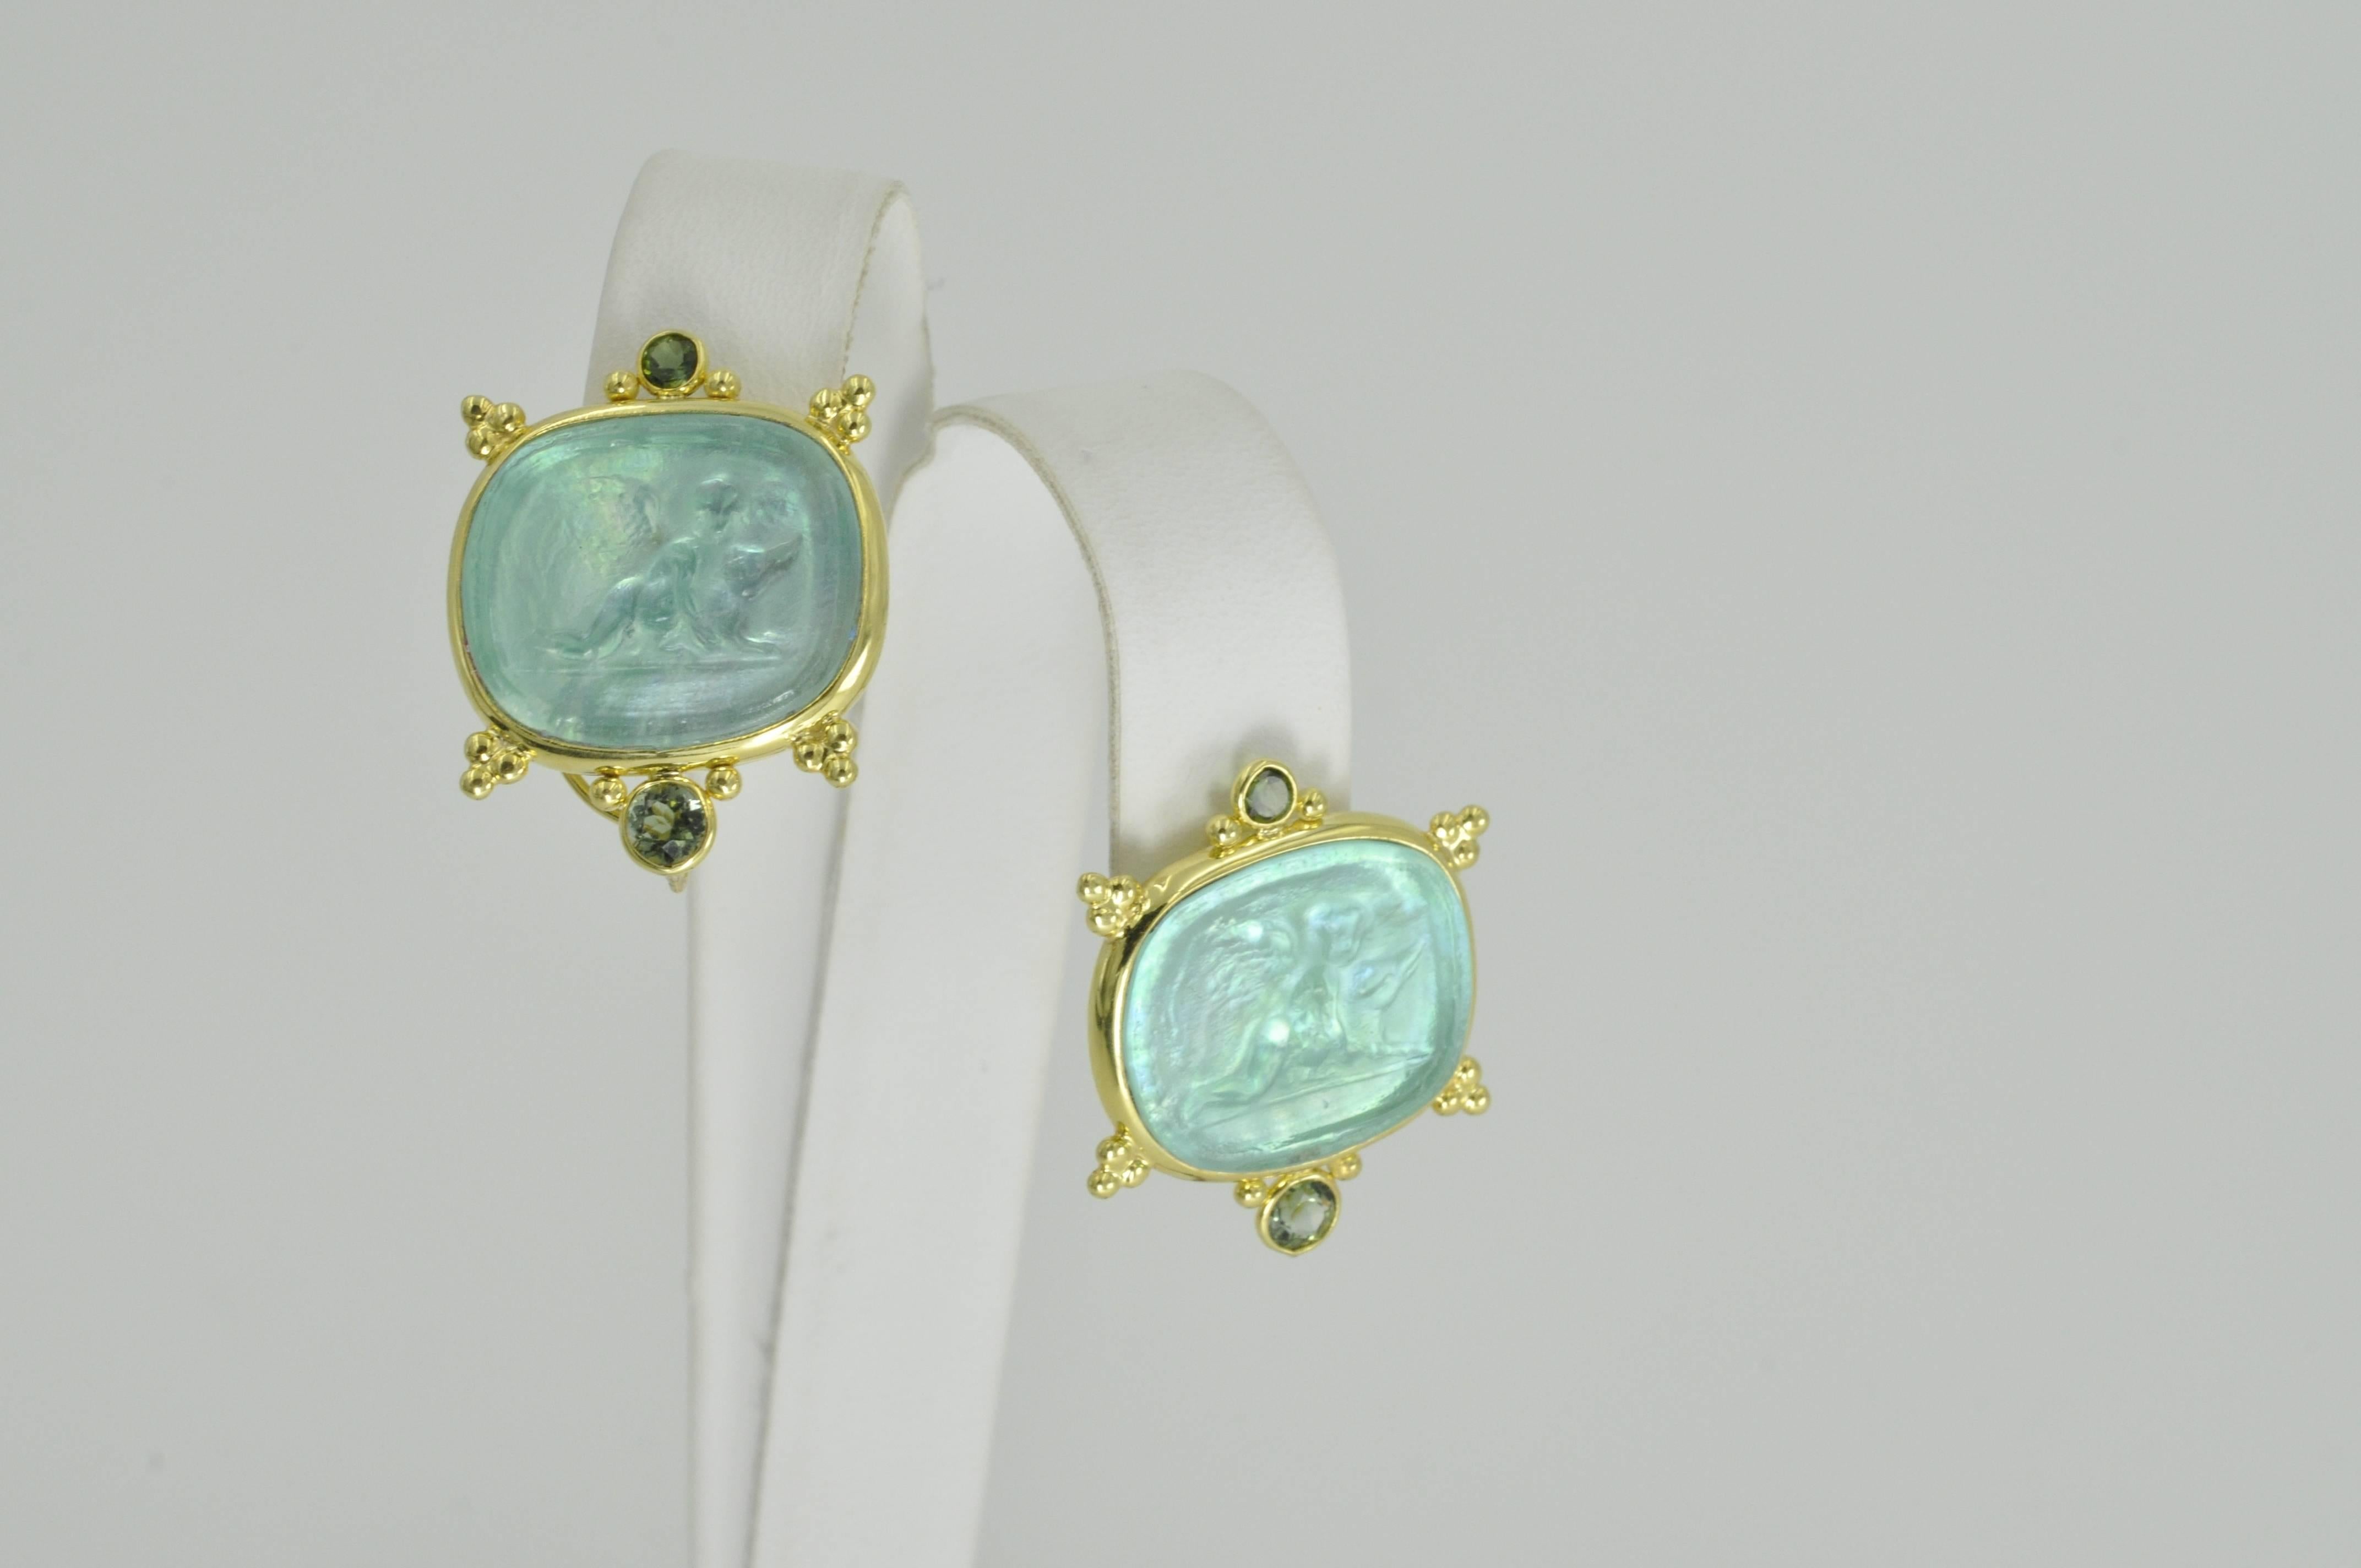 Venetian Glass Earrings with two round Green Tourmalines per earring, designed by Mazza in 14k Yellow Gold.
Charms may also dangle off the bottom of these beautiful earrings. 
